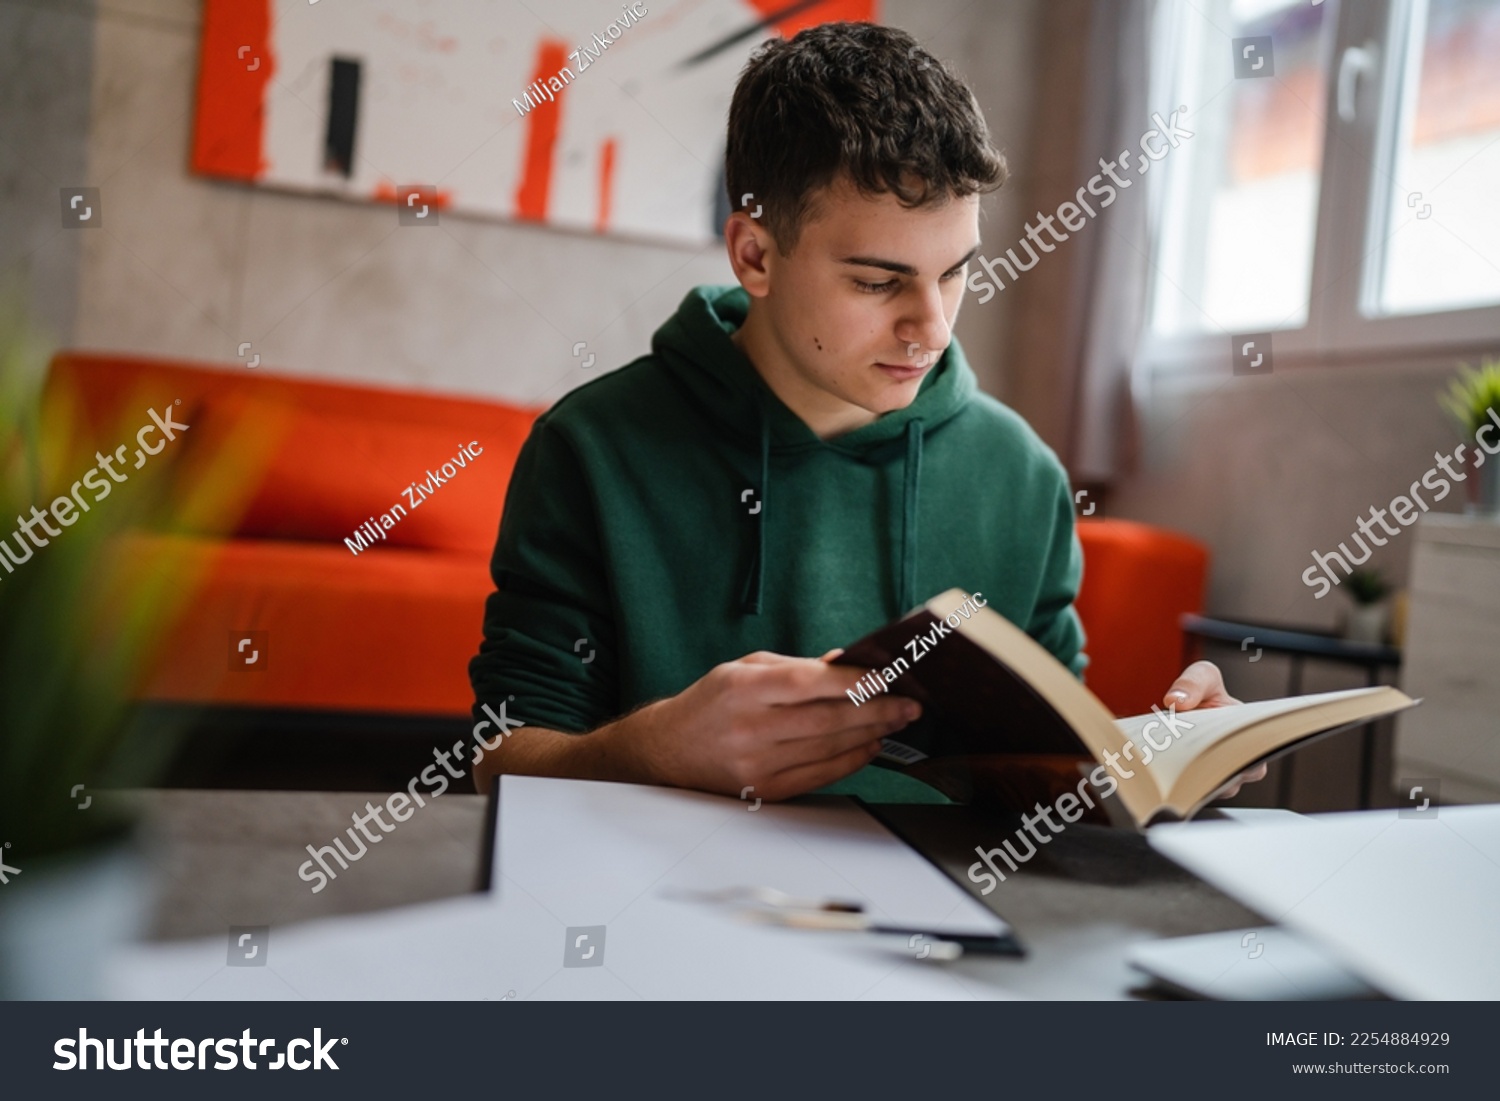 one young man caucasian teenager student learning study reading book while sitting at home prepare exam or work on project real people education concept copy space #2254884929